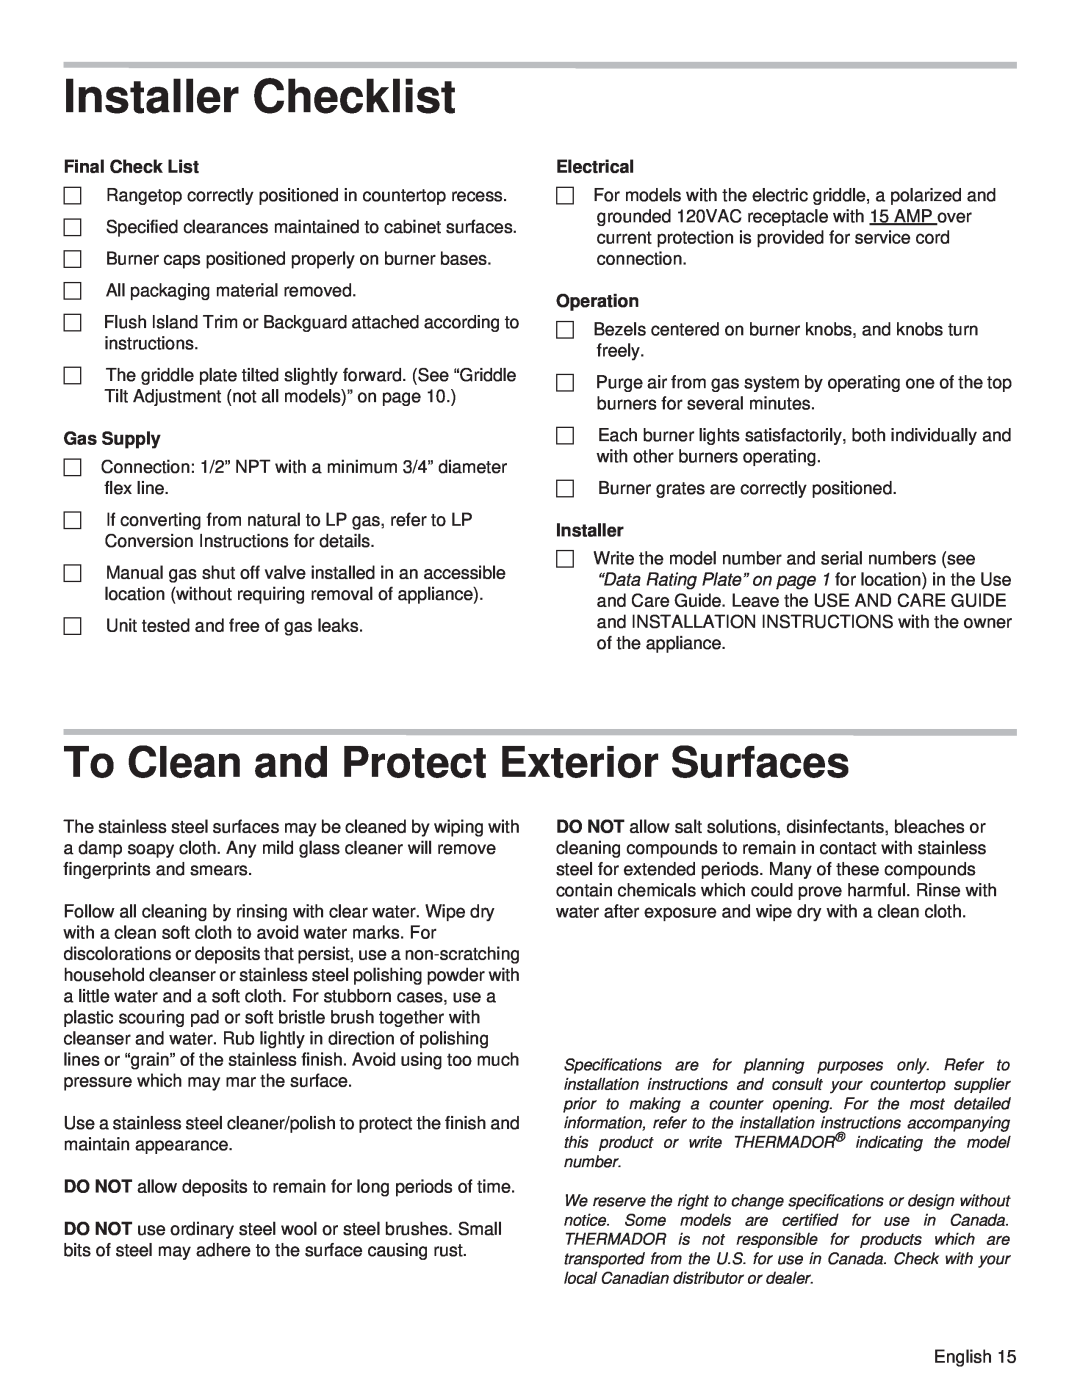 Thermador PCG30 Installer Checklist, To Clean and Protect Exterior Surfaces, Final Check List, Electrical, Operation 